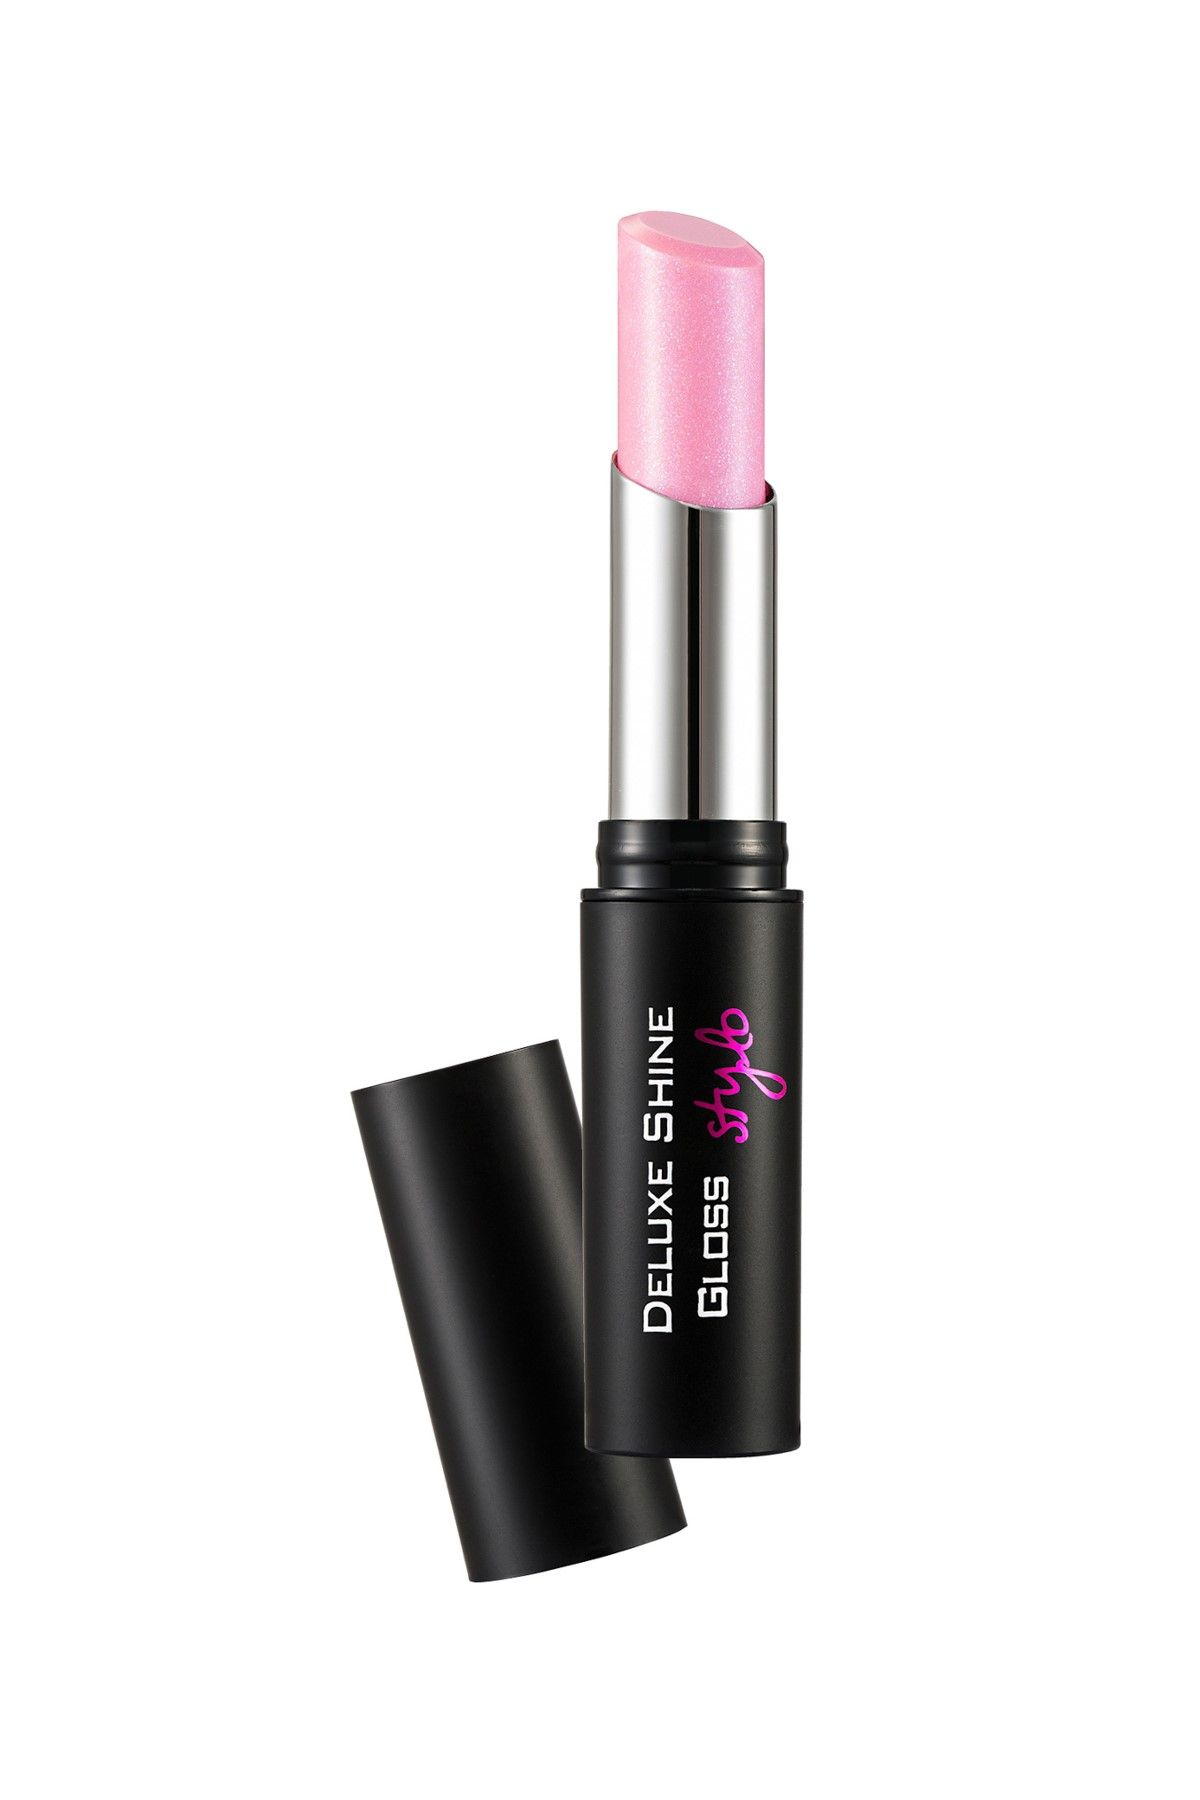 Flormar Ruj - Deluxe Shine Gloss Stylo Pale in Pink 8690604209514